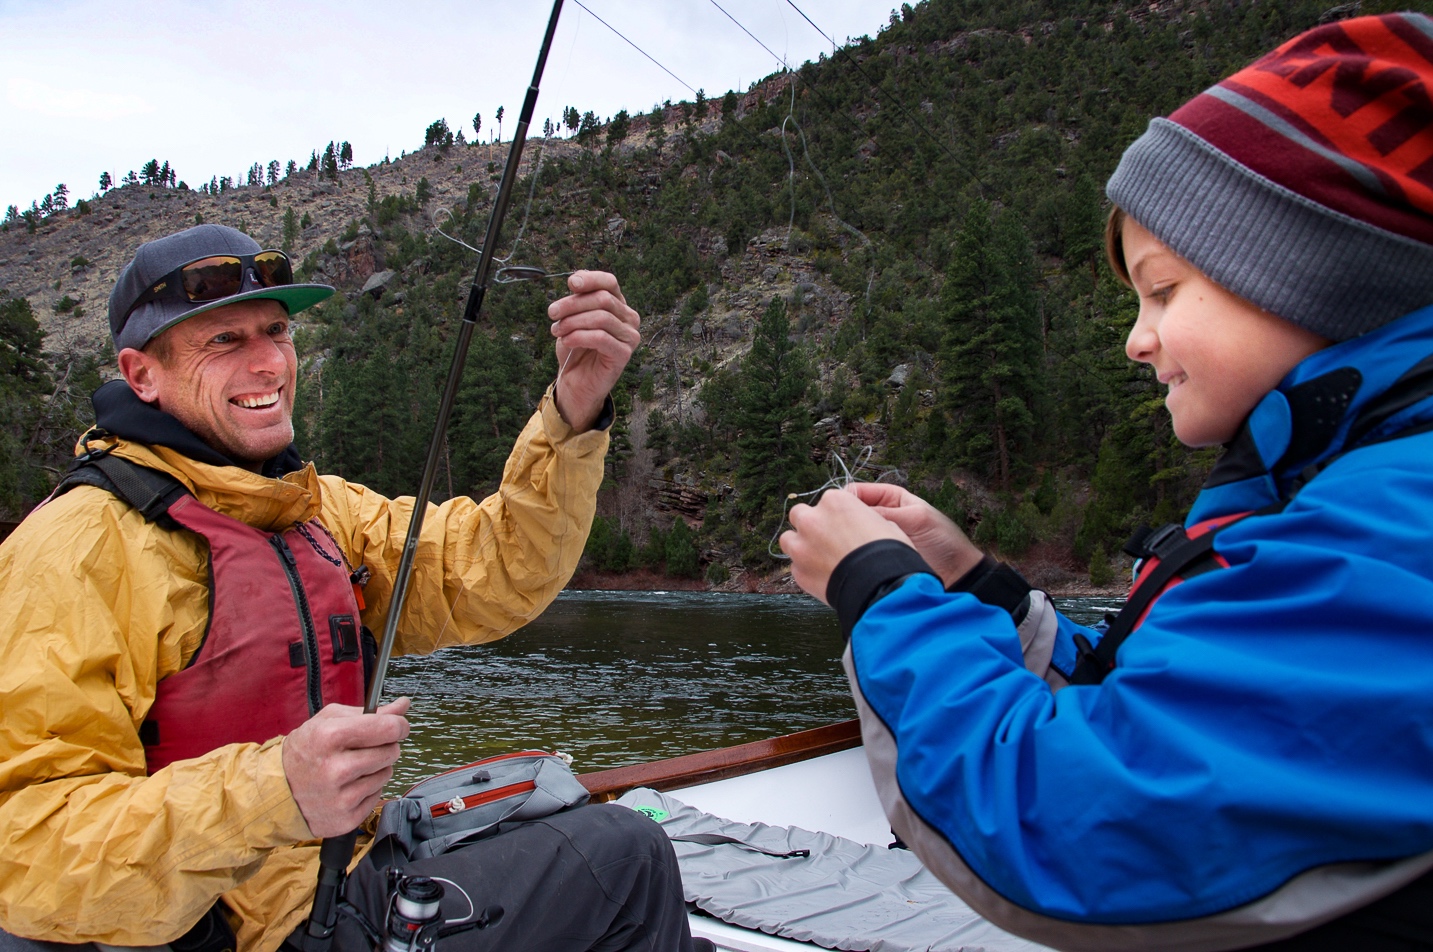 Fishing with the Family on Flaming Gorge